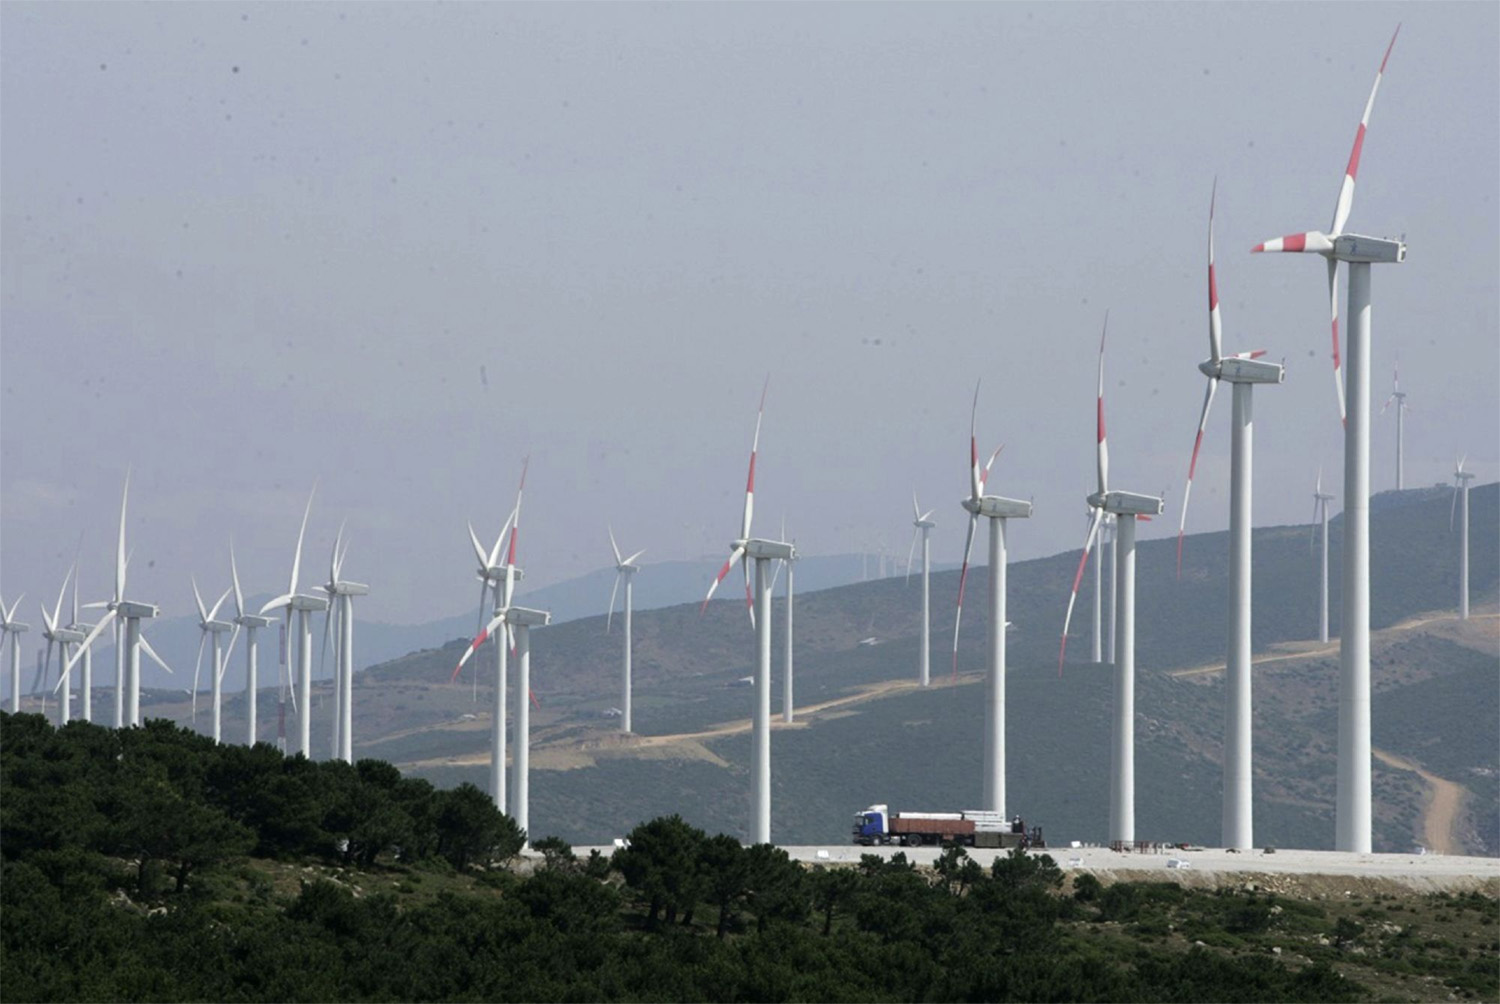 Morocco is one of the leading countries in the world in producing renewable energy